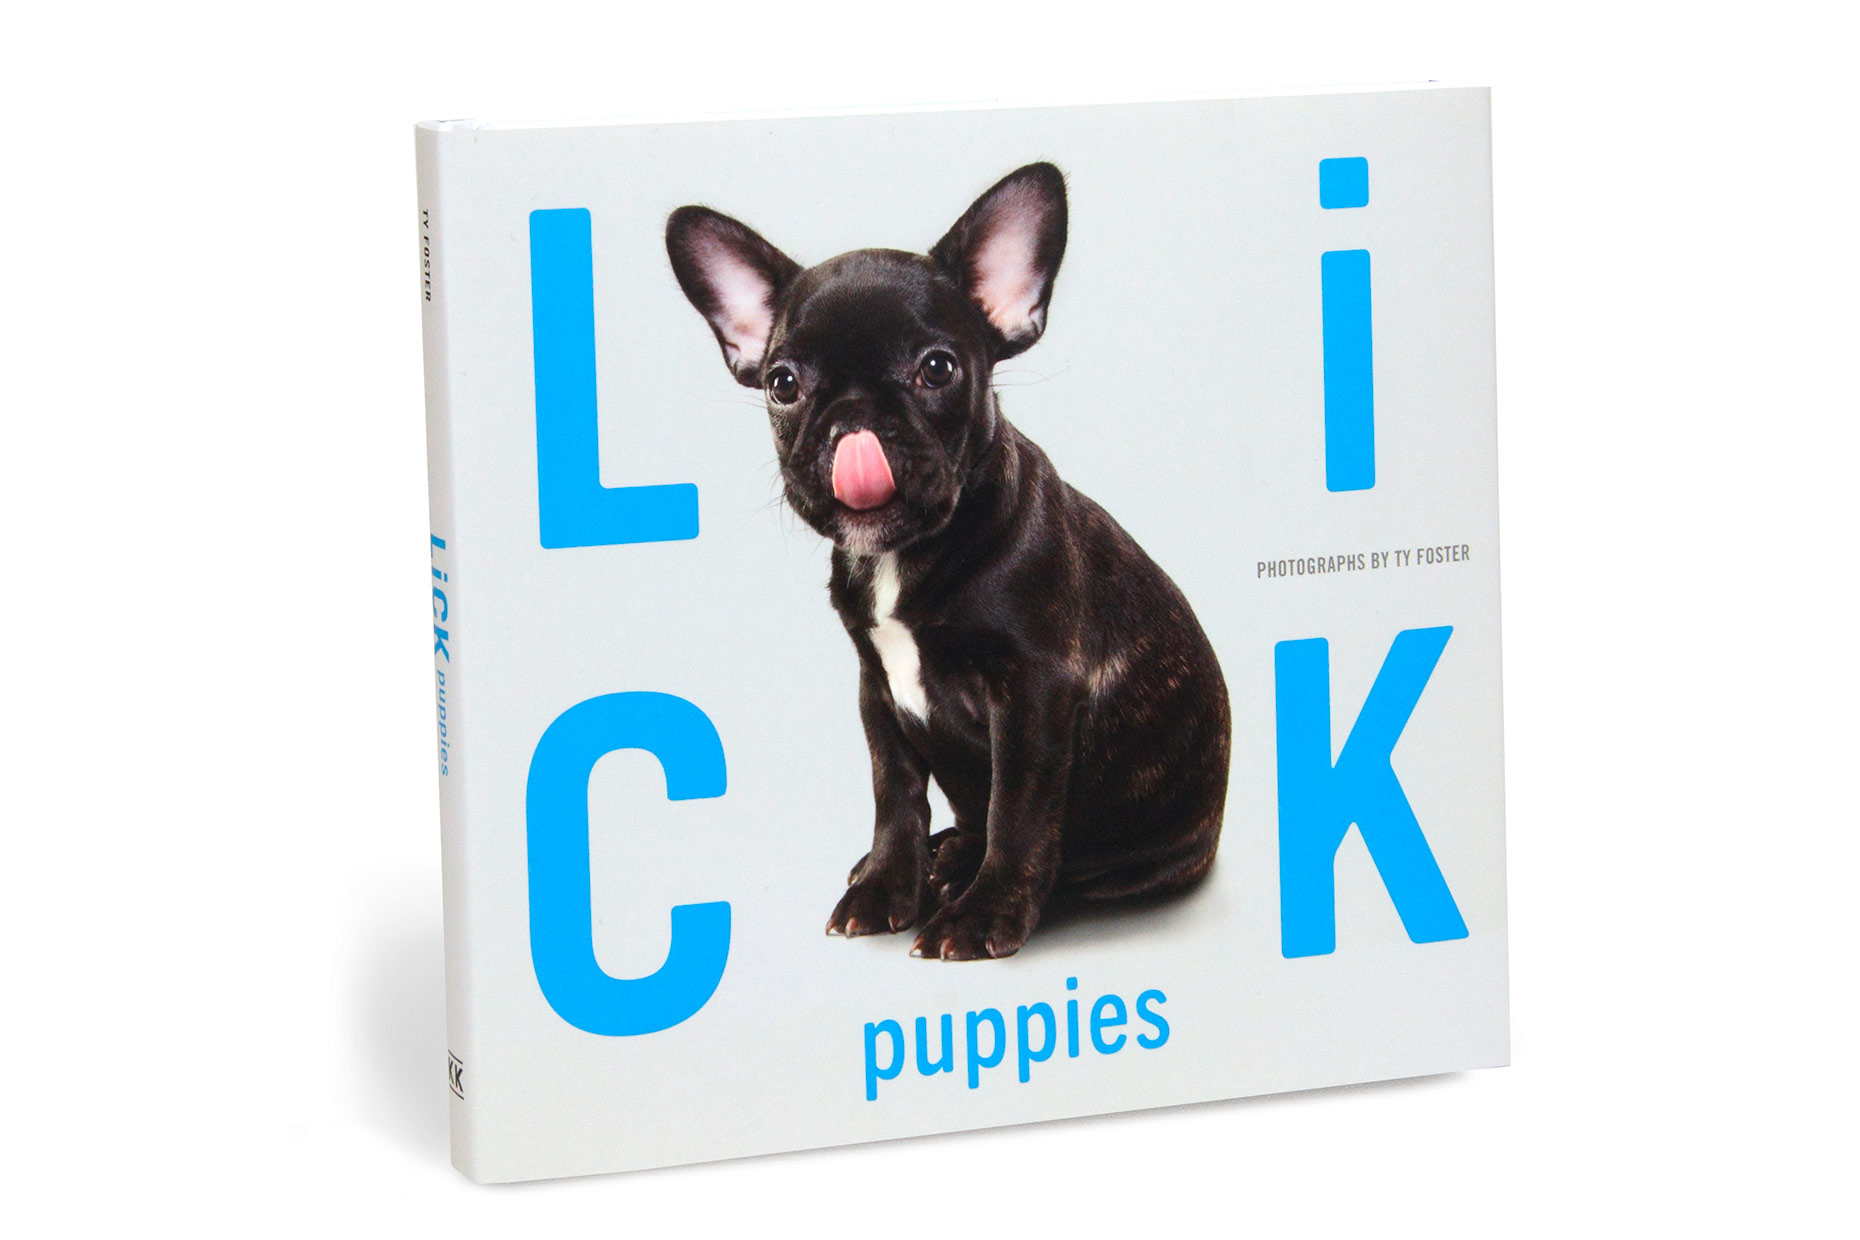 Lick Puppies book available on amazon by ty foster